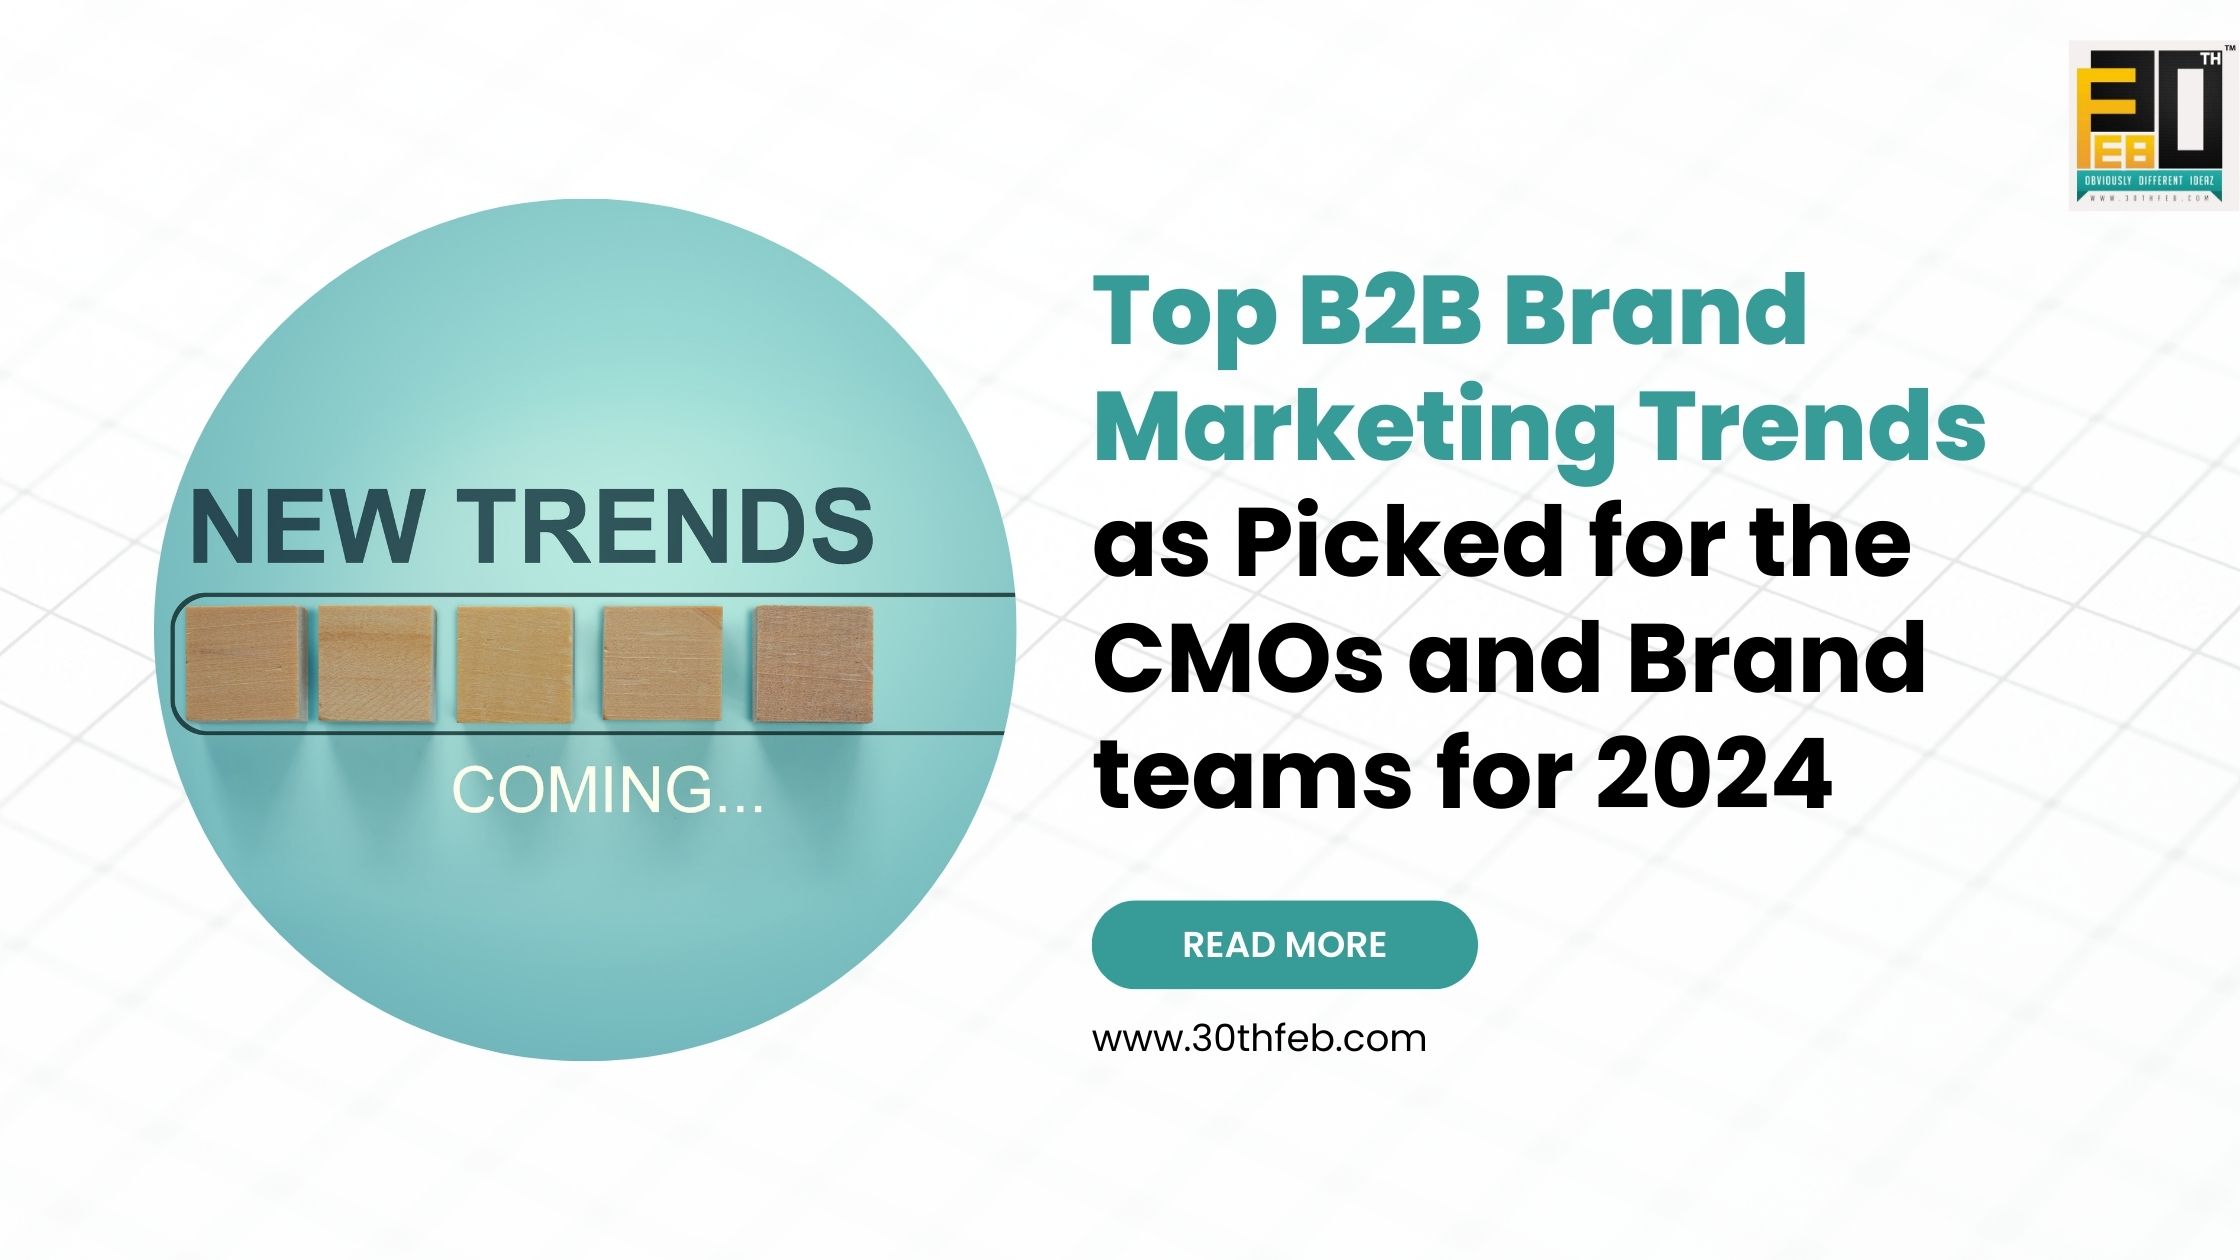 Top B2B Brand Marketing Trends as Picked by the CMOs for 2024